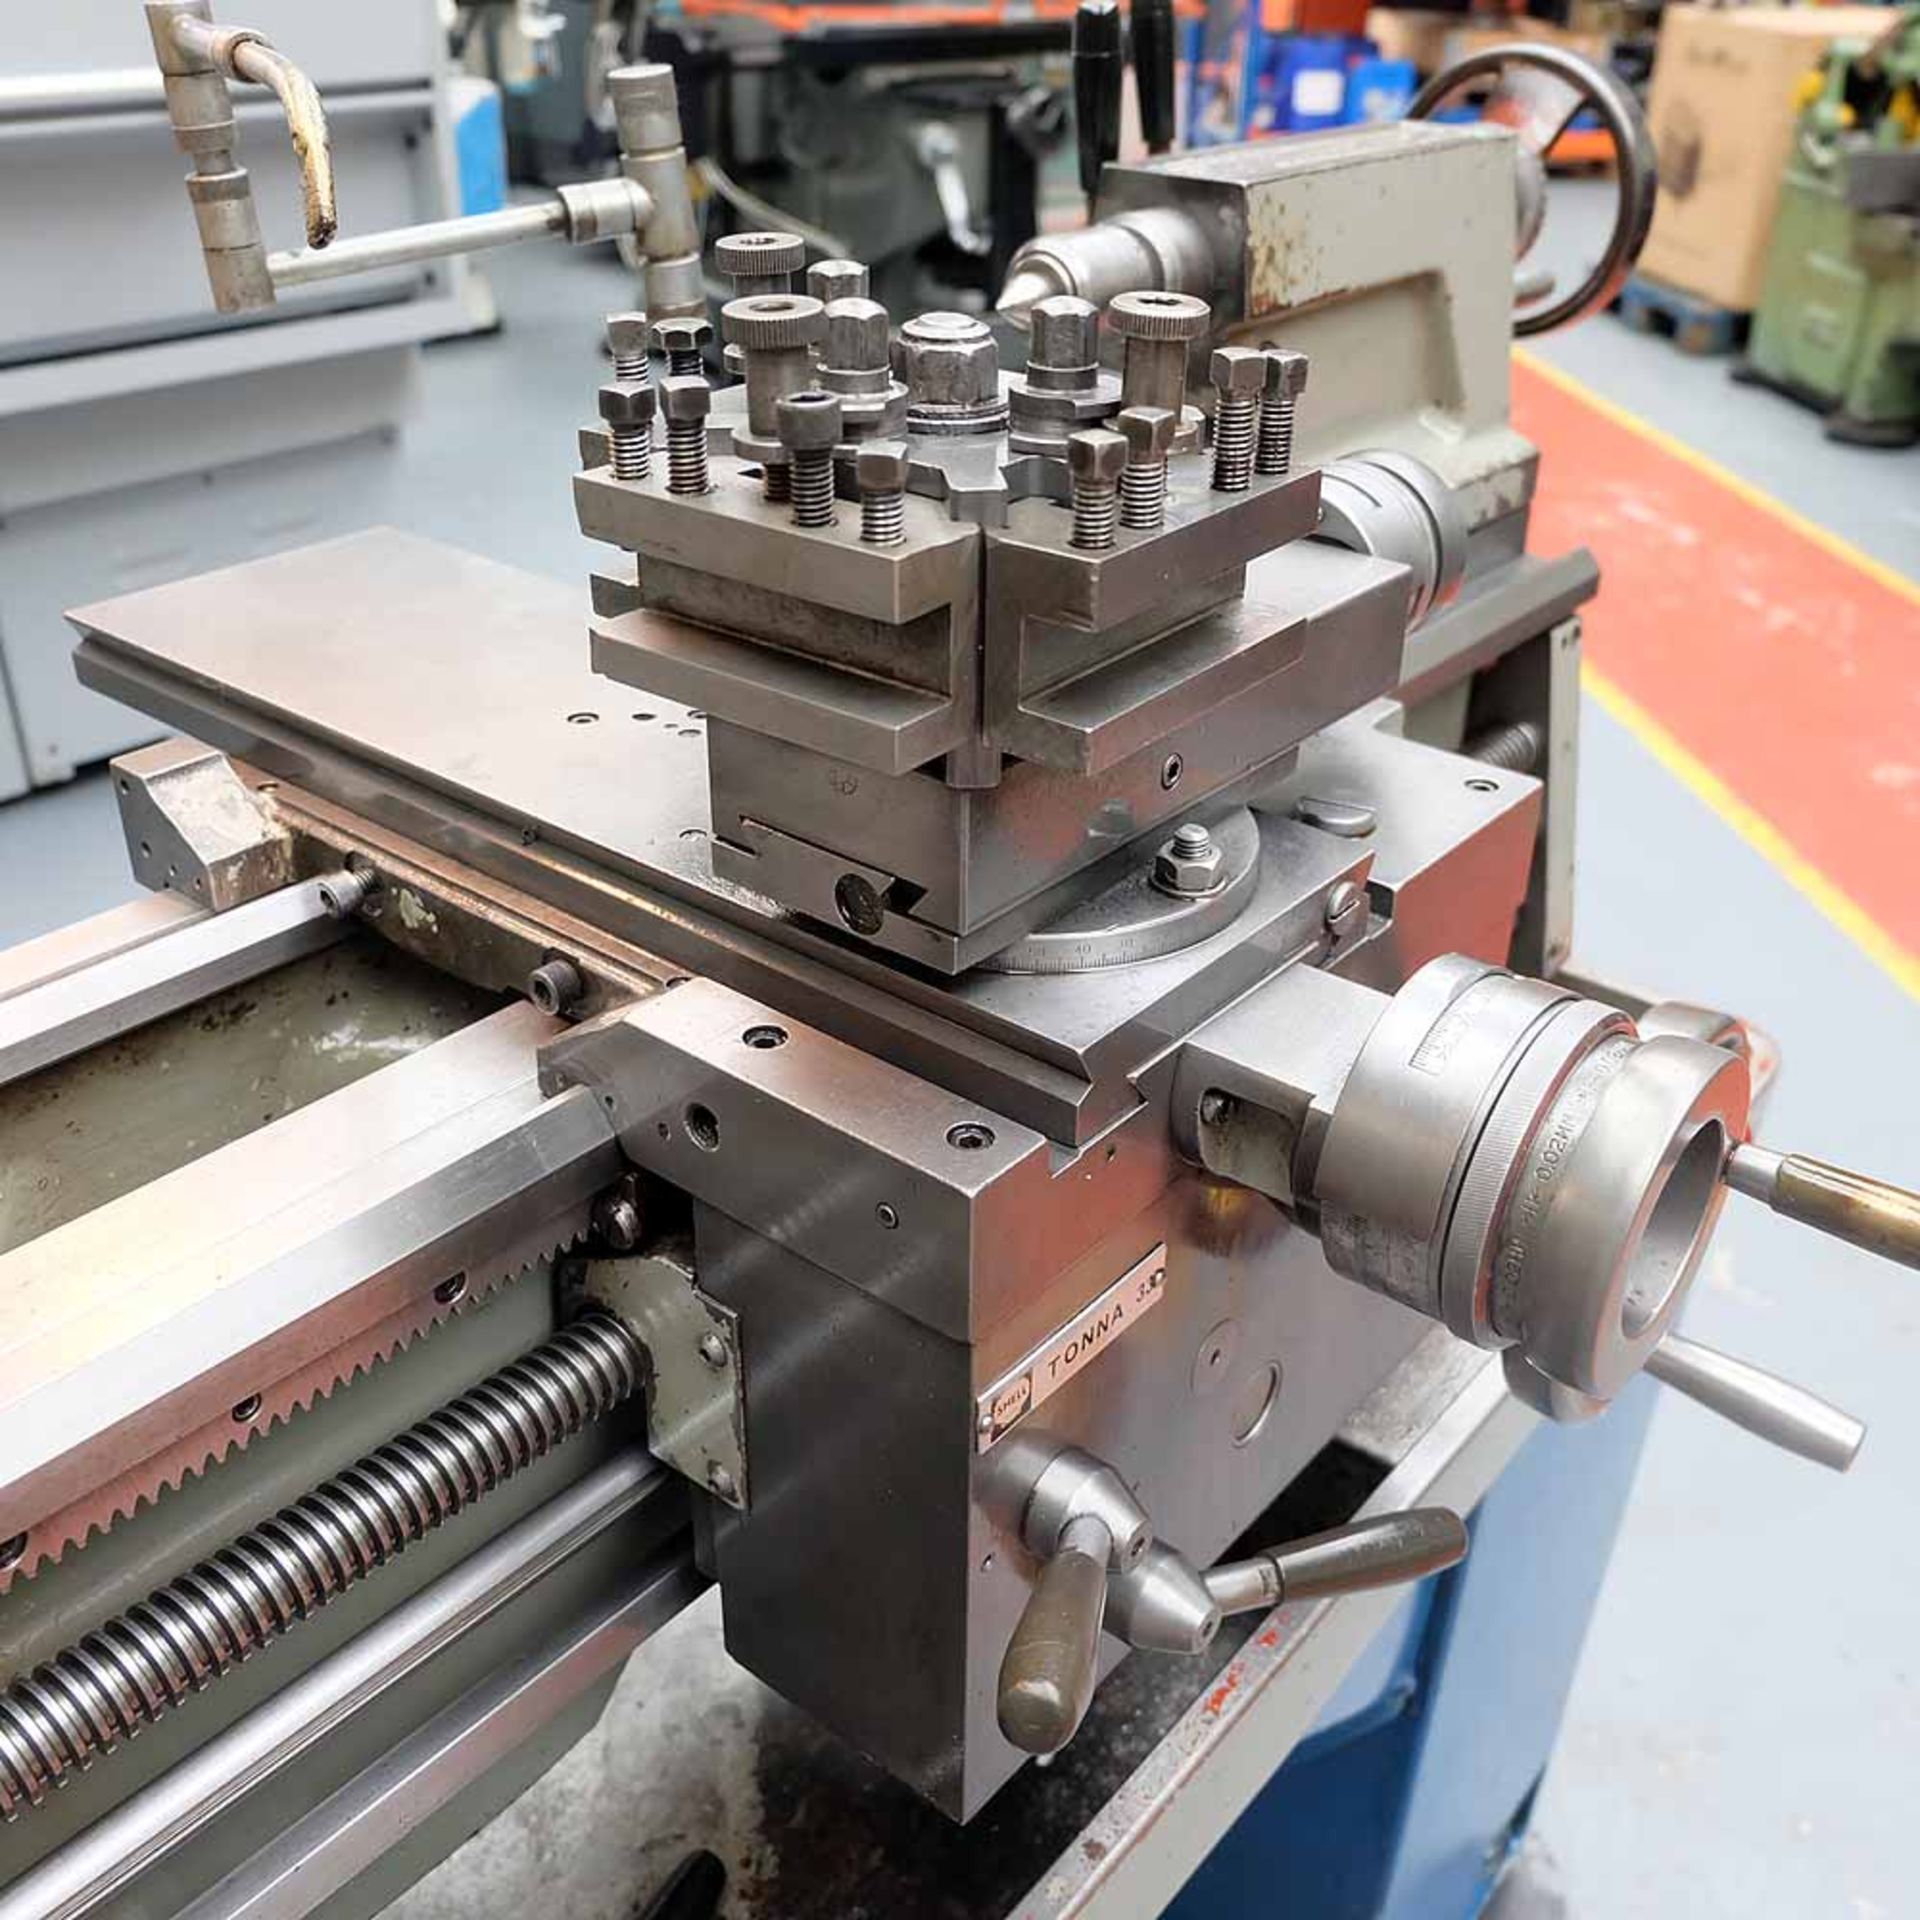 Colchester Student 1800 Gap Bed Centre Lathe. Capacity 13" Diameter x 25" Between Centres. - Image 2 of 6